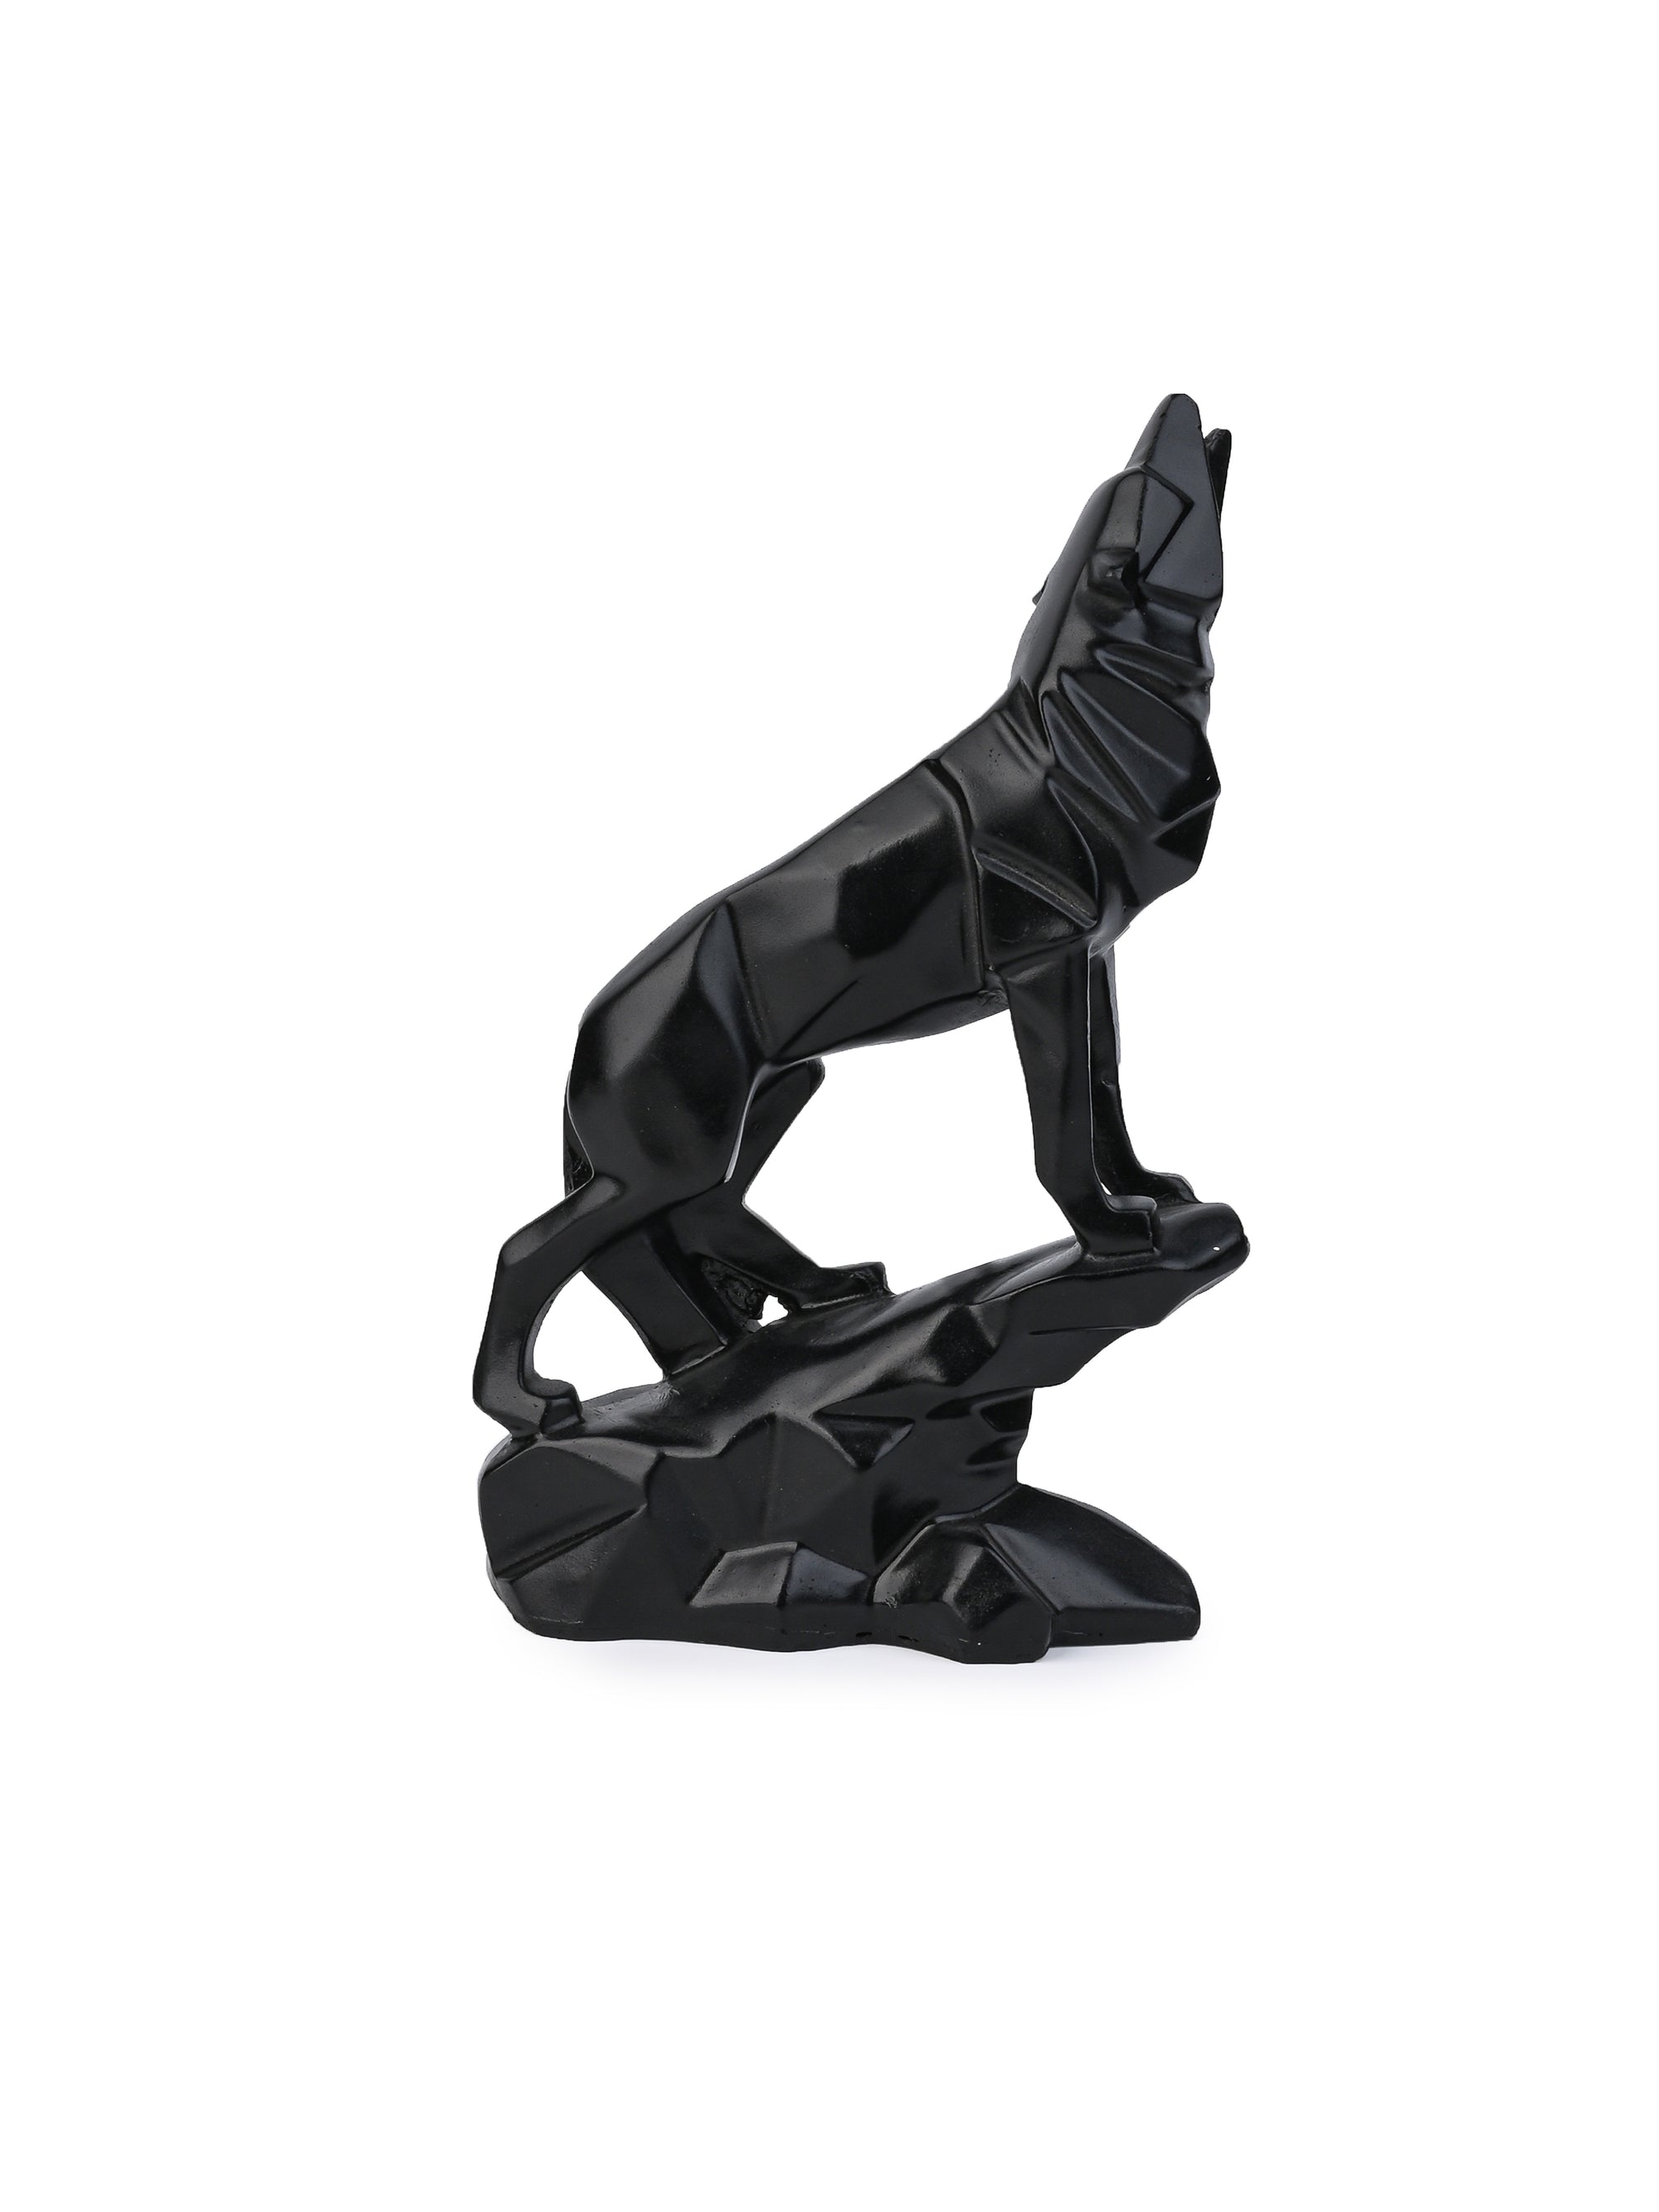 Geometric Black Wolf Table Decor Crafted from Polyresin